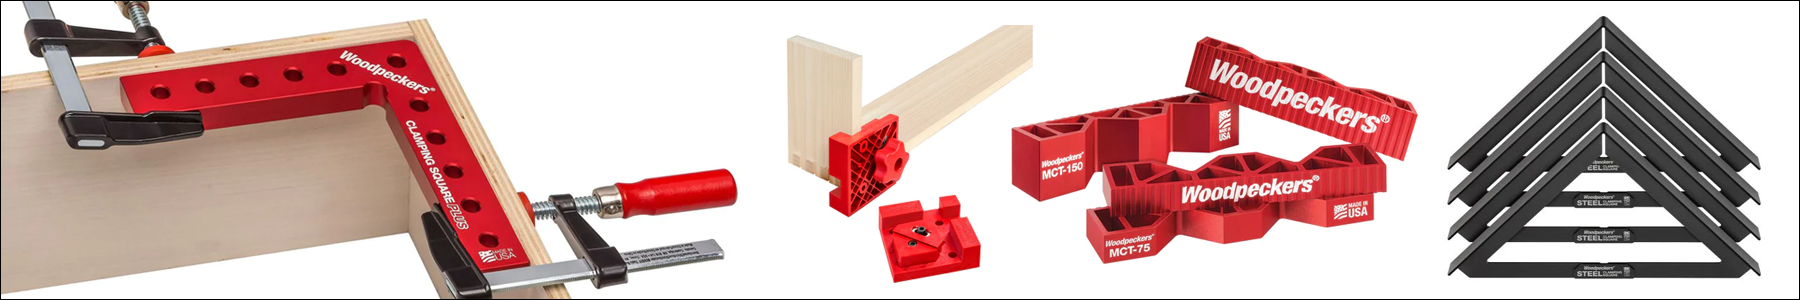 Woodpeckers Clamping products